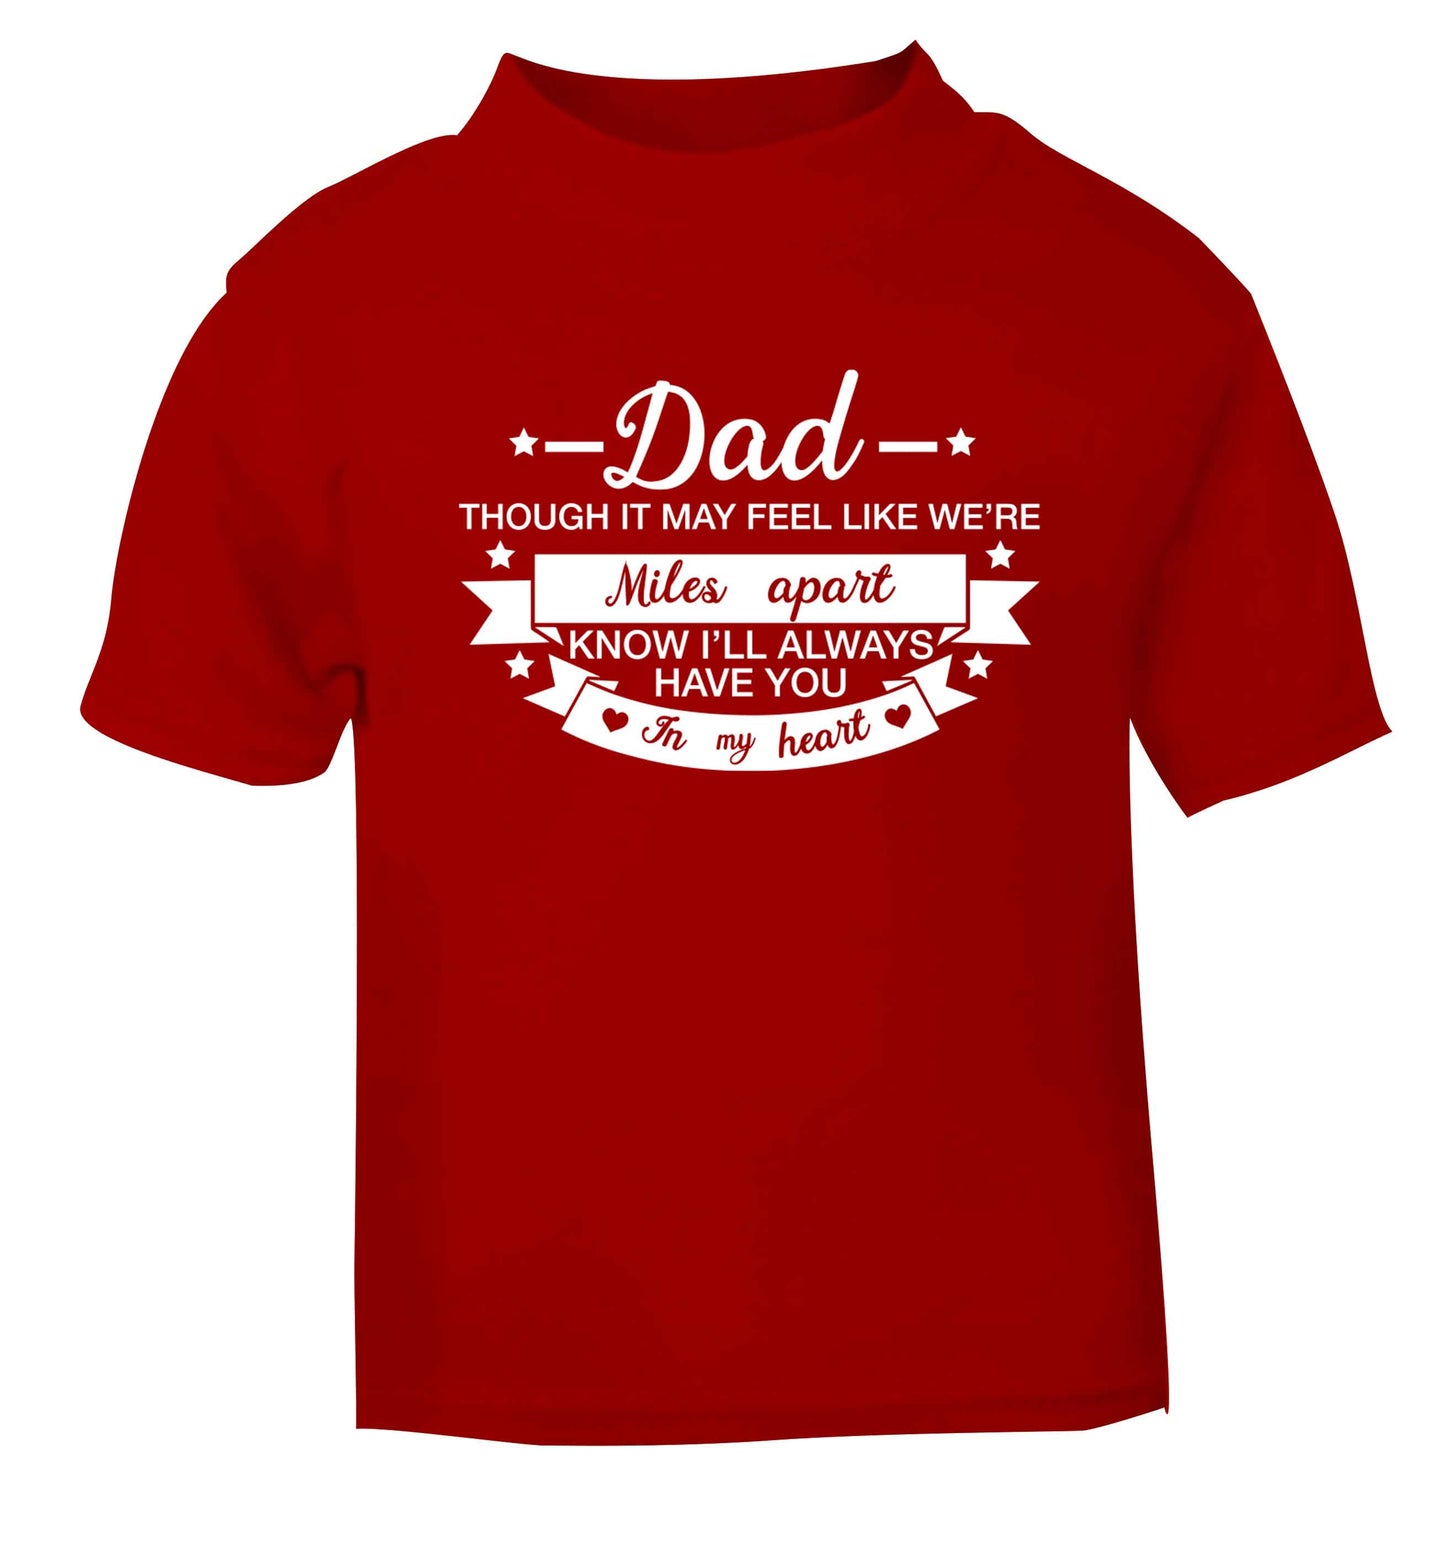 Dad though it may feel like we're miles apart know I'll always have you in my heart red baby toddler Tshirt 2 Years